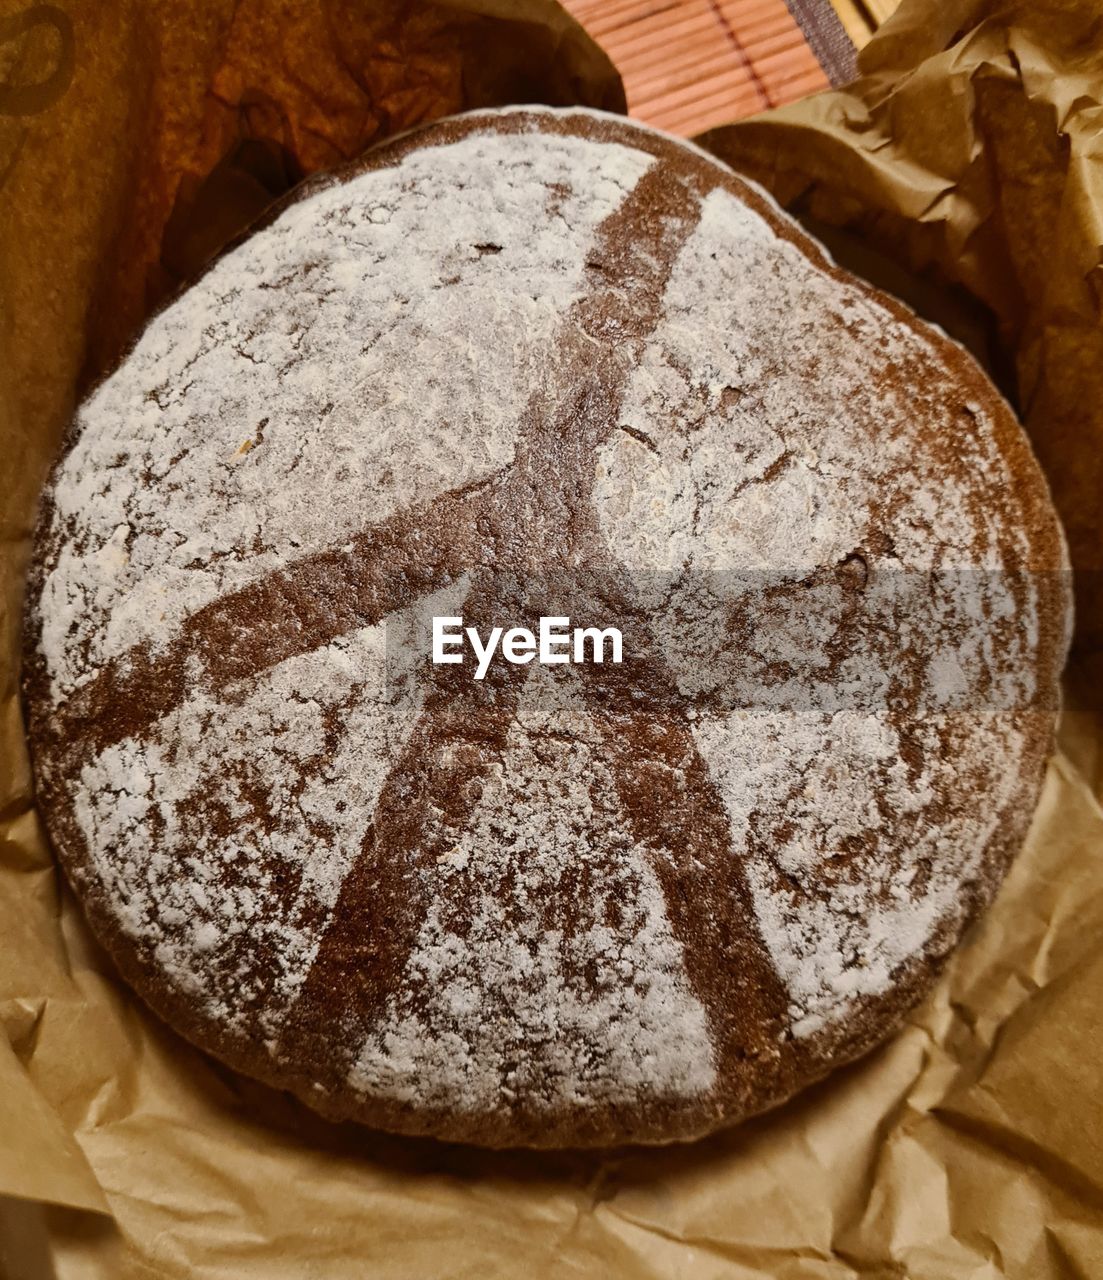 food, powdered sugar, baked, food and drink, rye bread, sourdough, bread, indoors, no people, close-up, still life, whole grain, freshness, brown bread, dessert, high angle view, soda bread, loaf of bread, brown, healthy eating